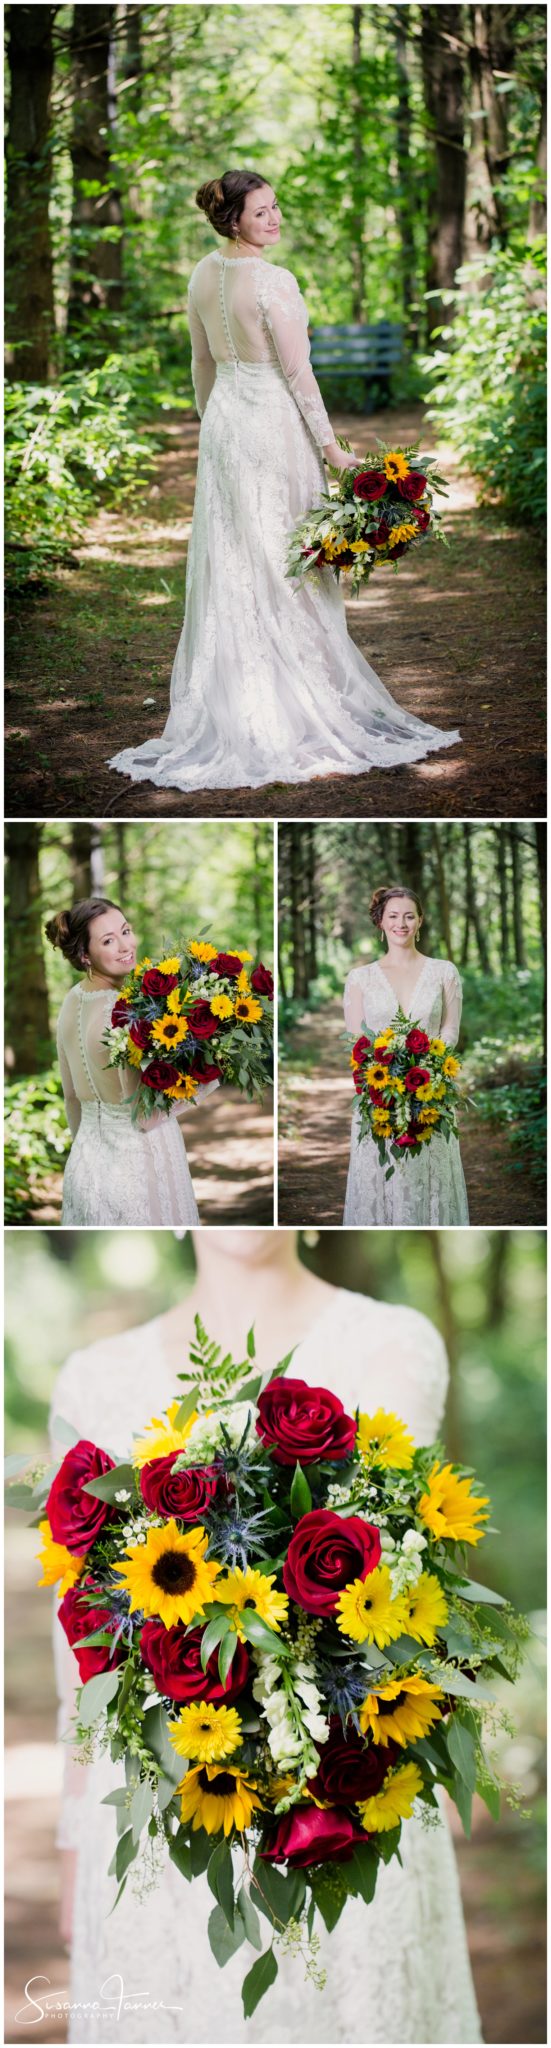 Cope Environmental Wedding Photography, Richmond Indiana, bridal portraits with bouquet of red roses and sunflowers